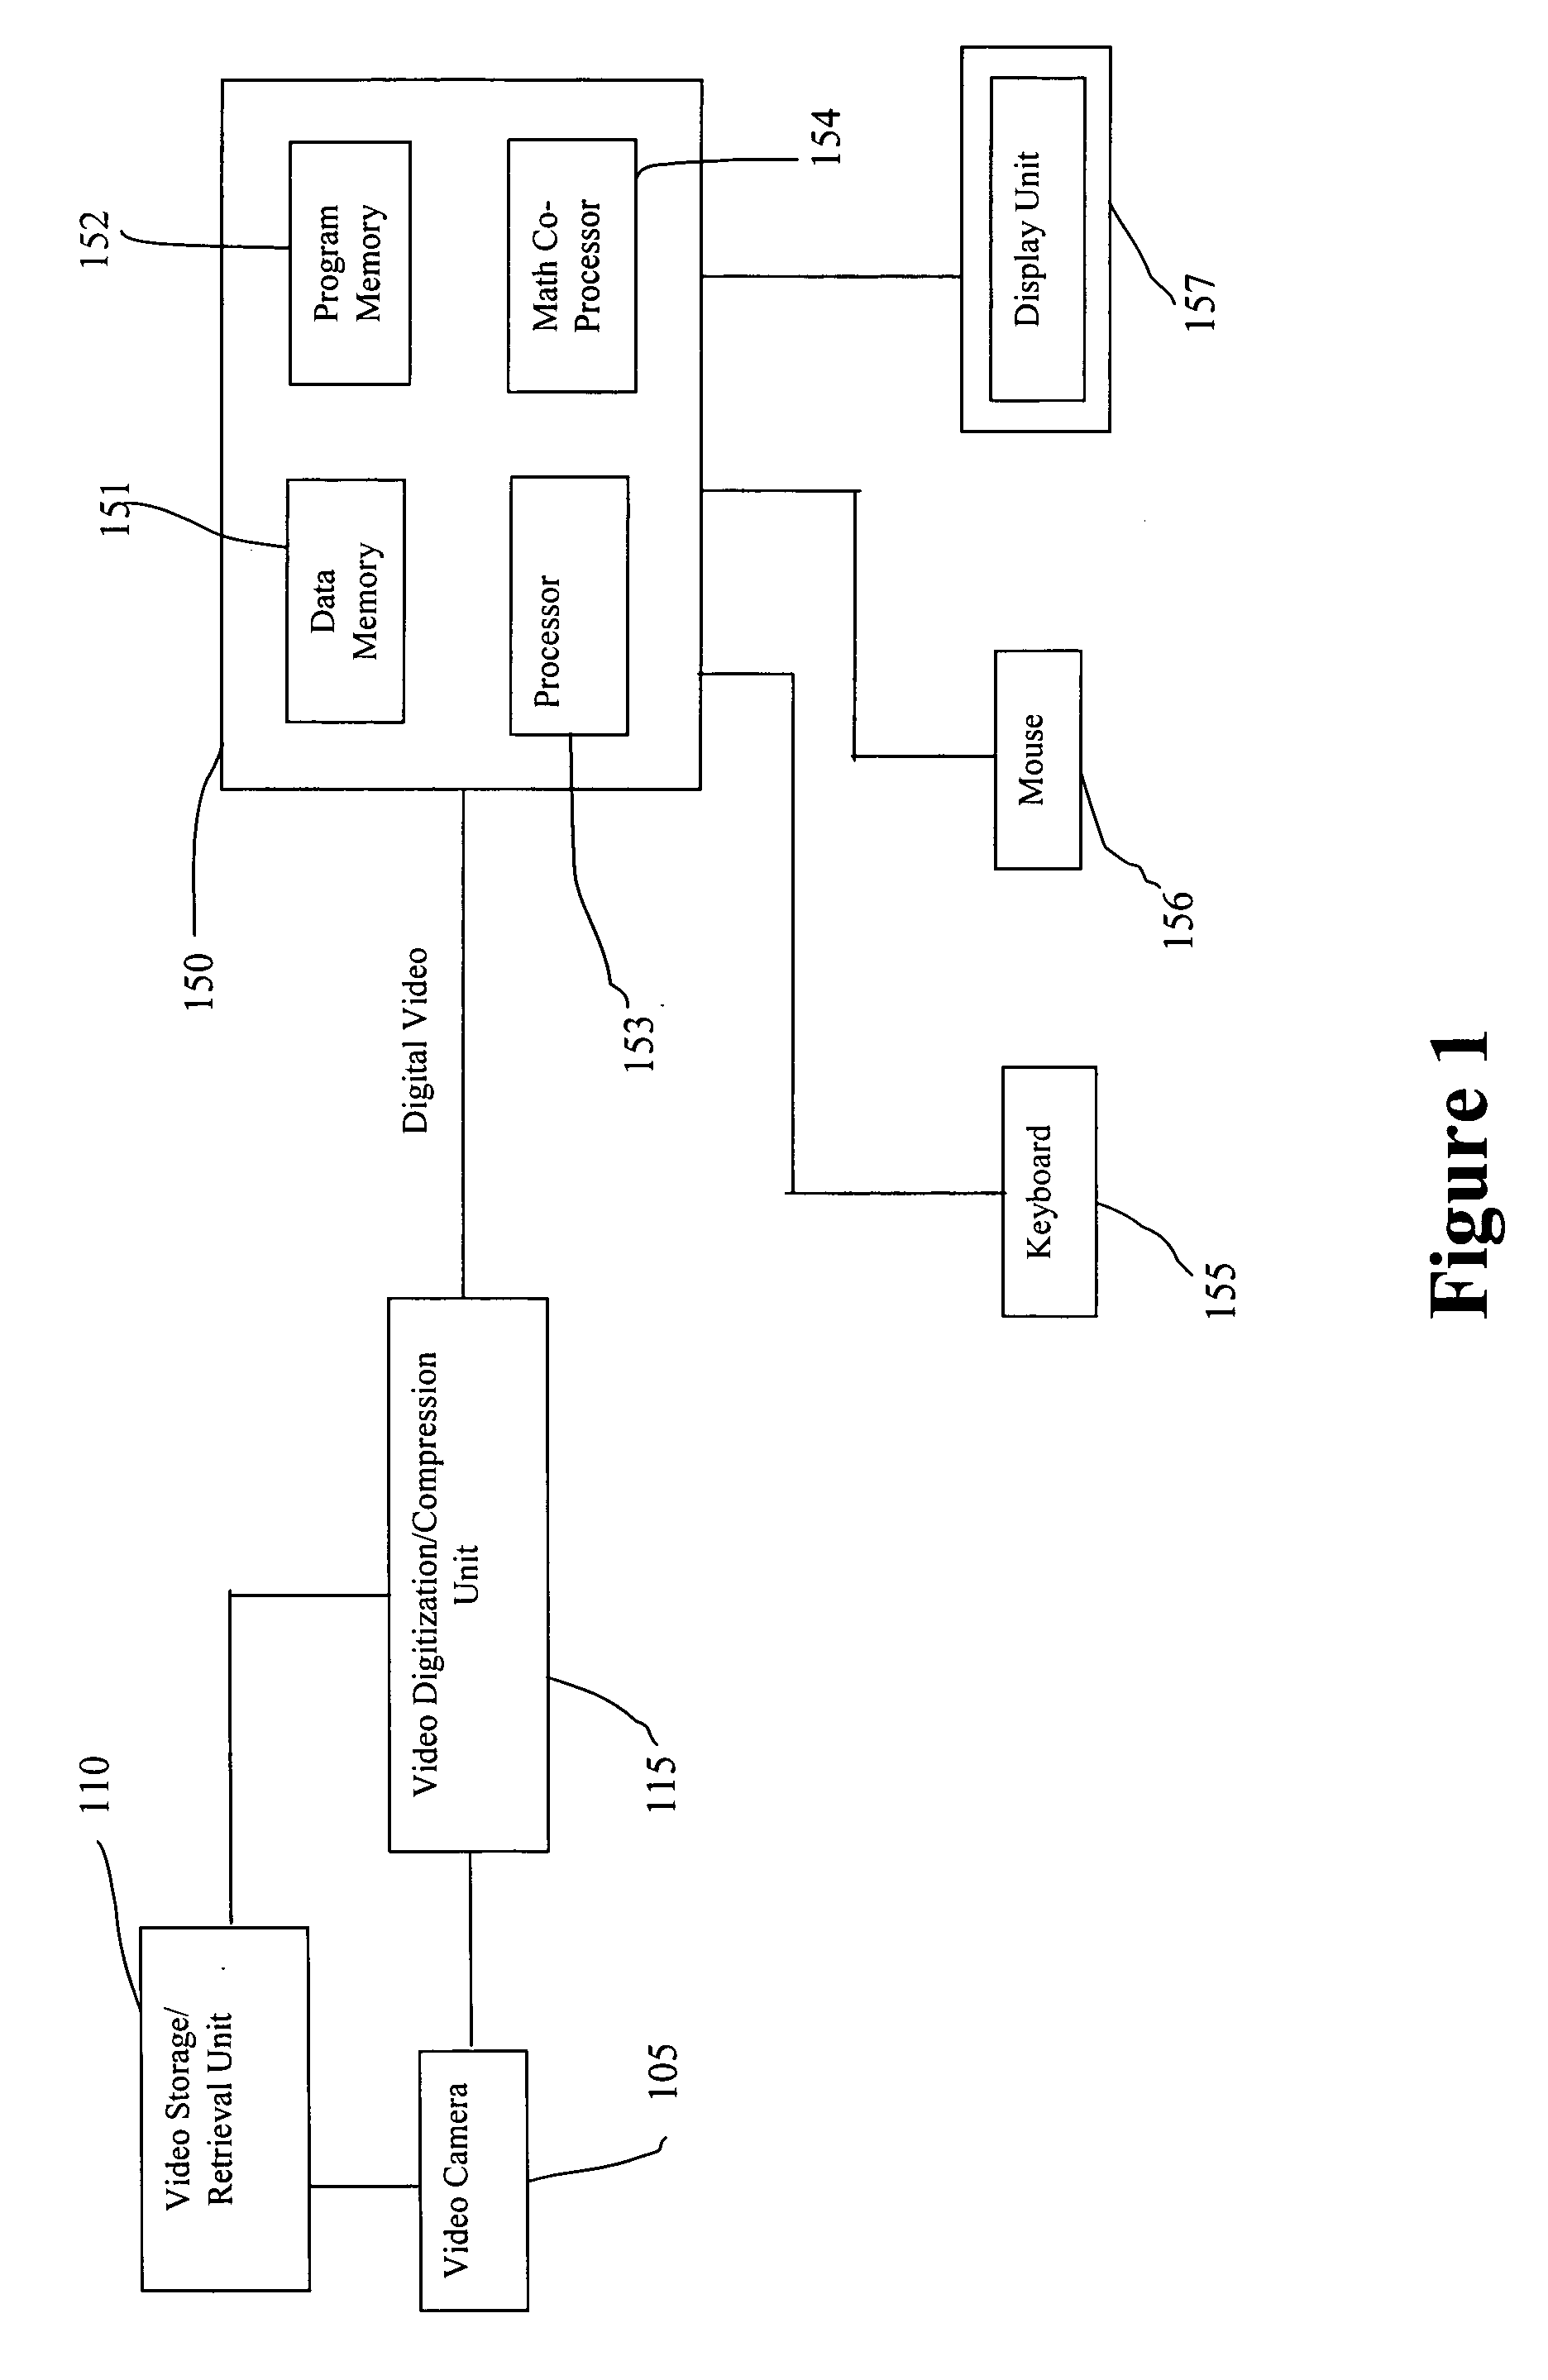 Unified system and method for animal behavior characterization in home cages using video analysis